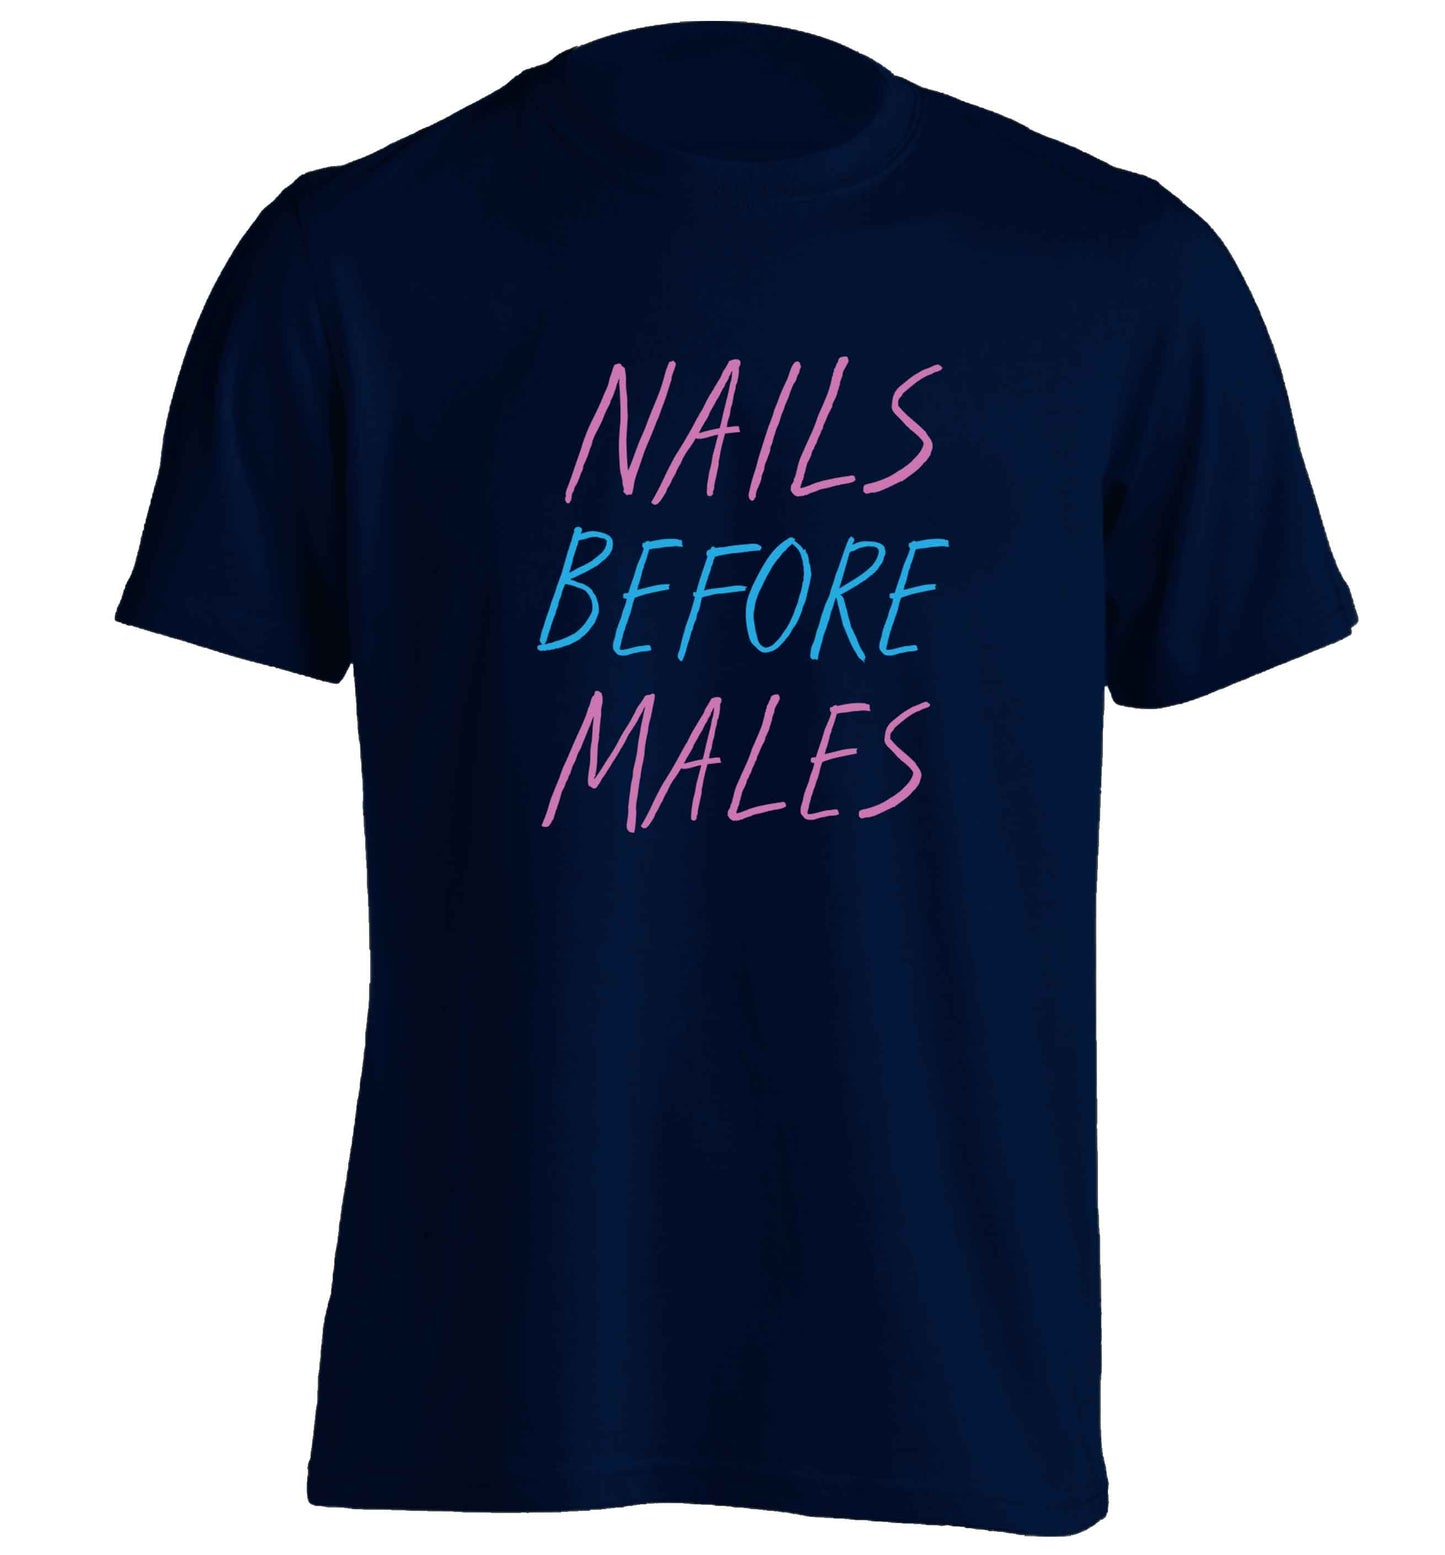 Nails before males adults unisex navy Tshirt 2XL